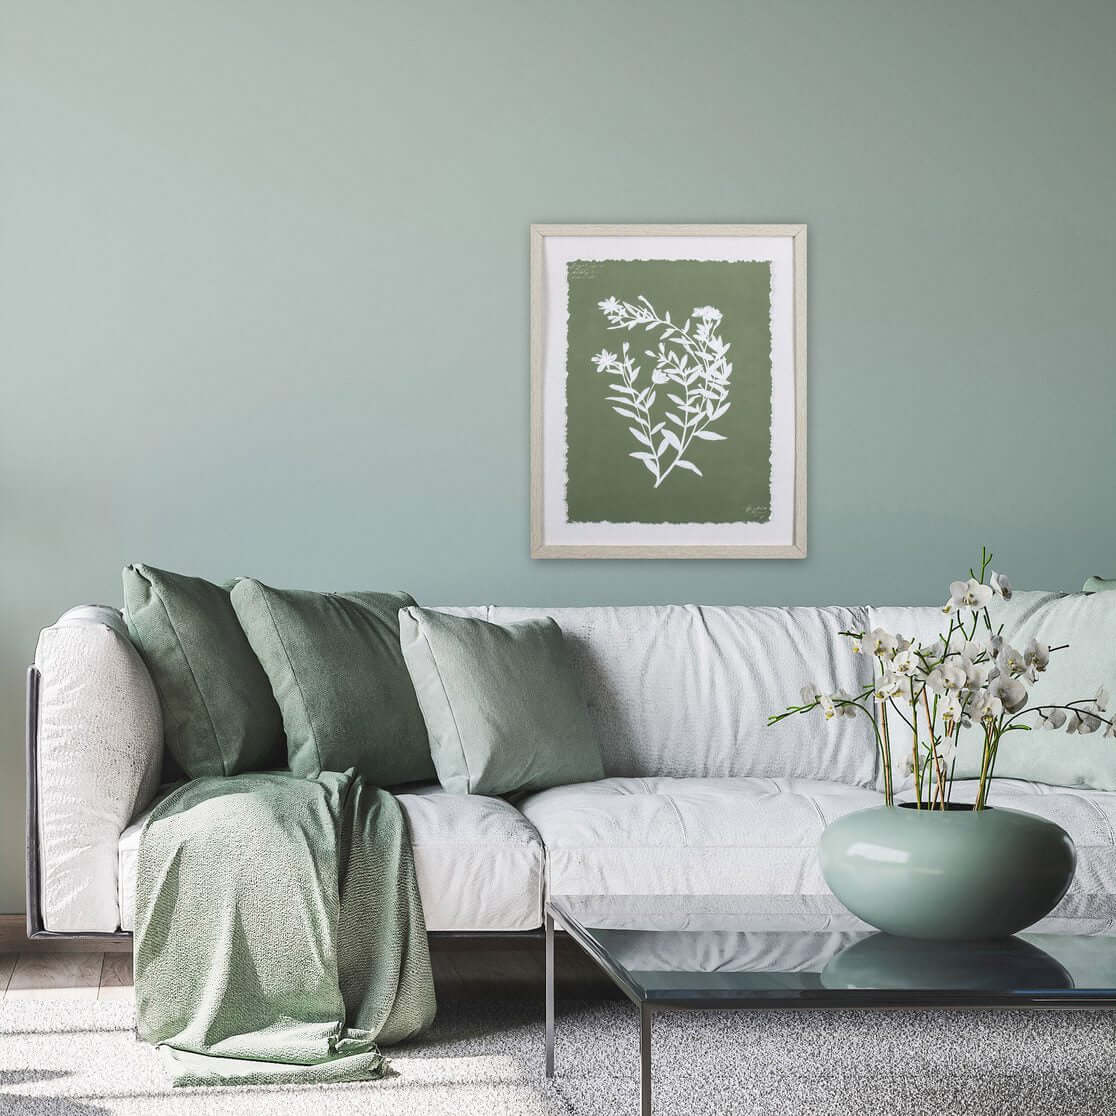 Sofa with Sage Pillows and Wall Art